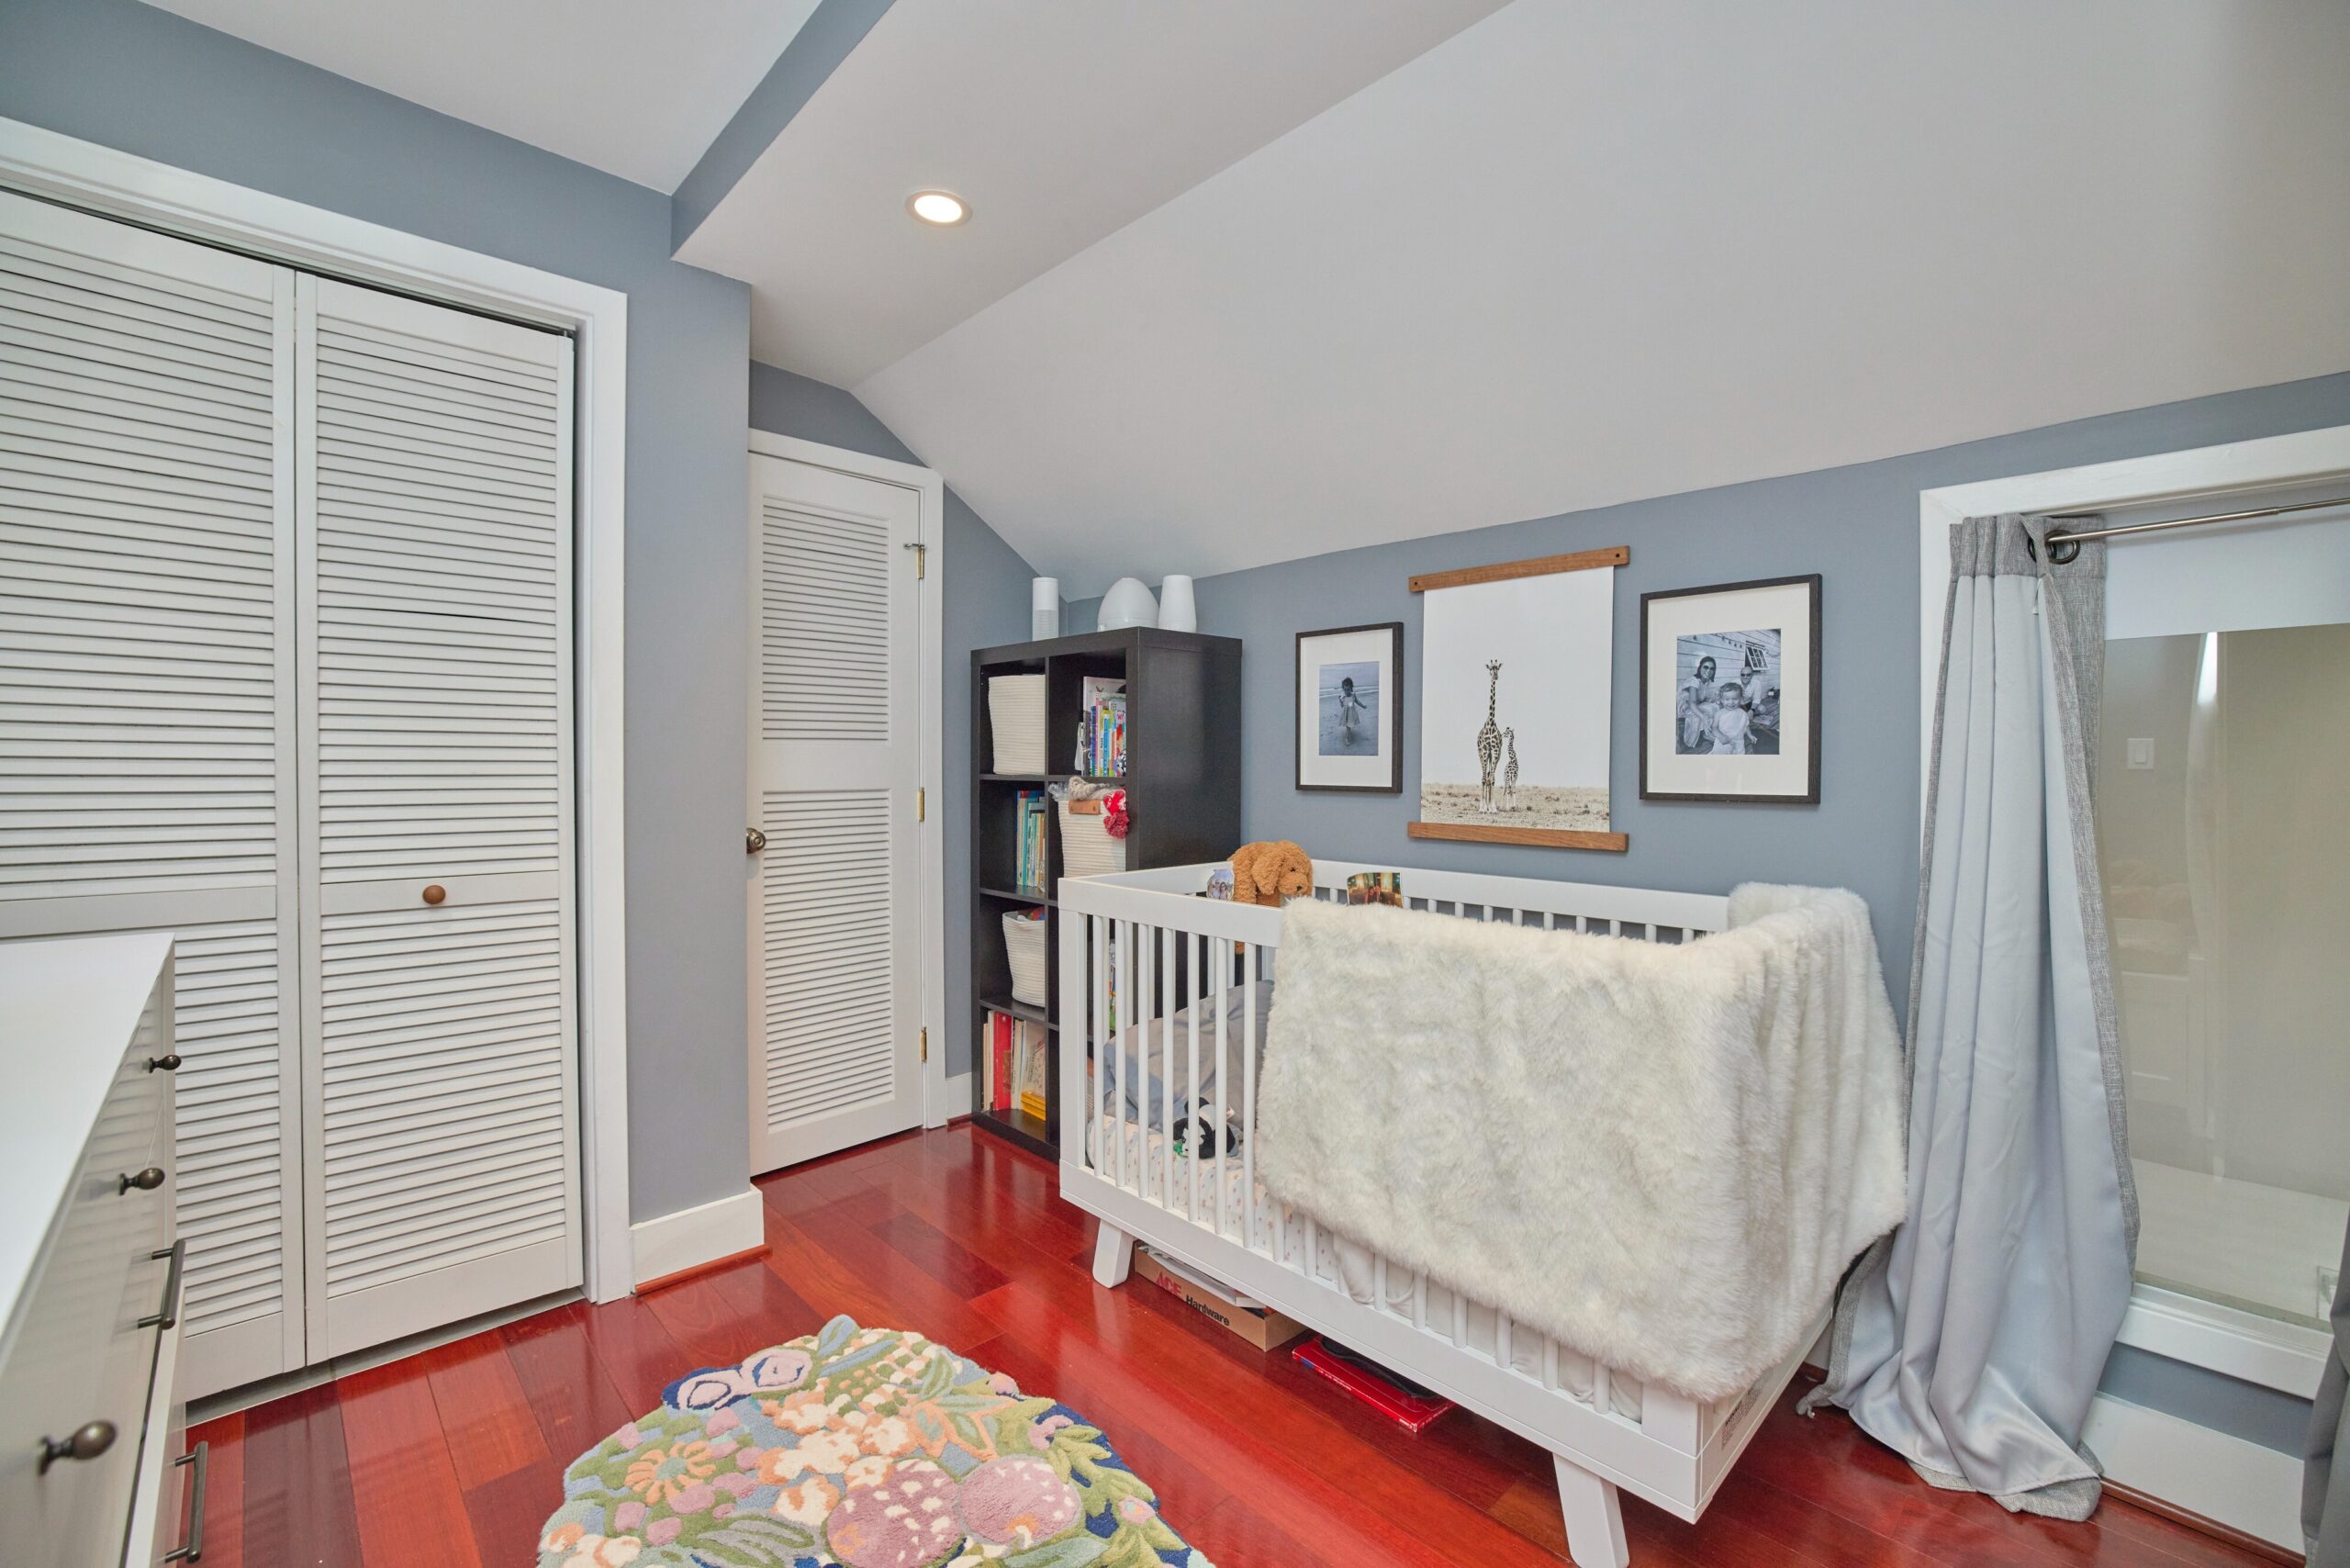 Professional interior photo of 1459 Harvard St NW #6 - showing the loft bedroom which is set as a nursery with angled ceiling and closets